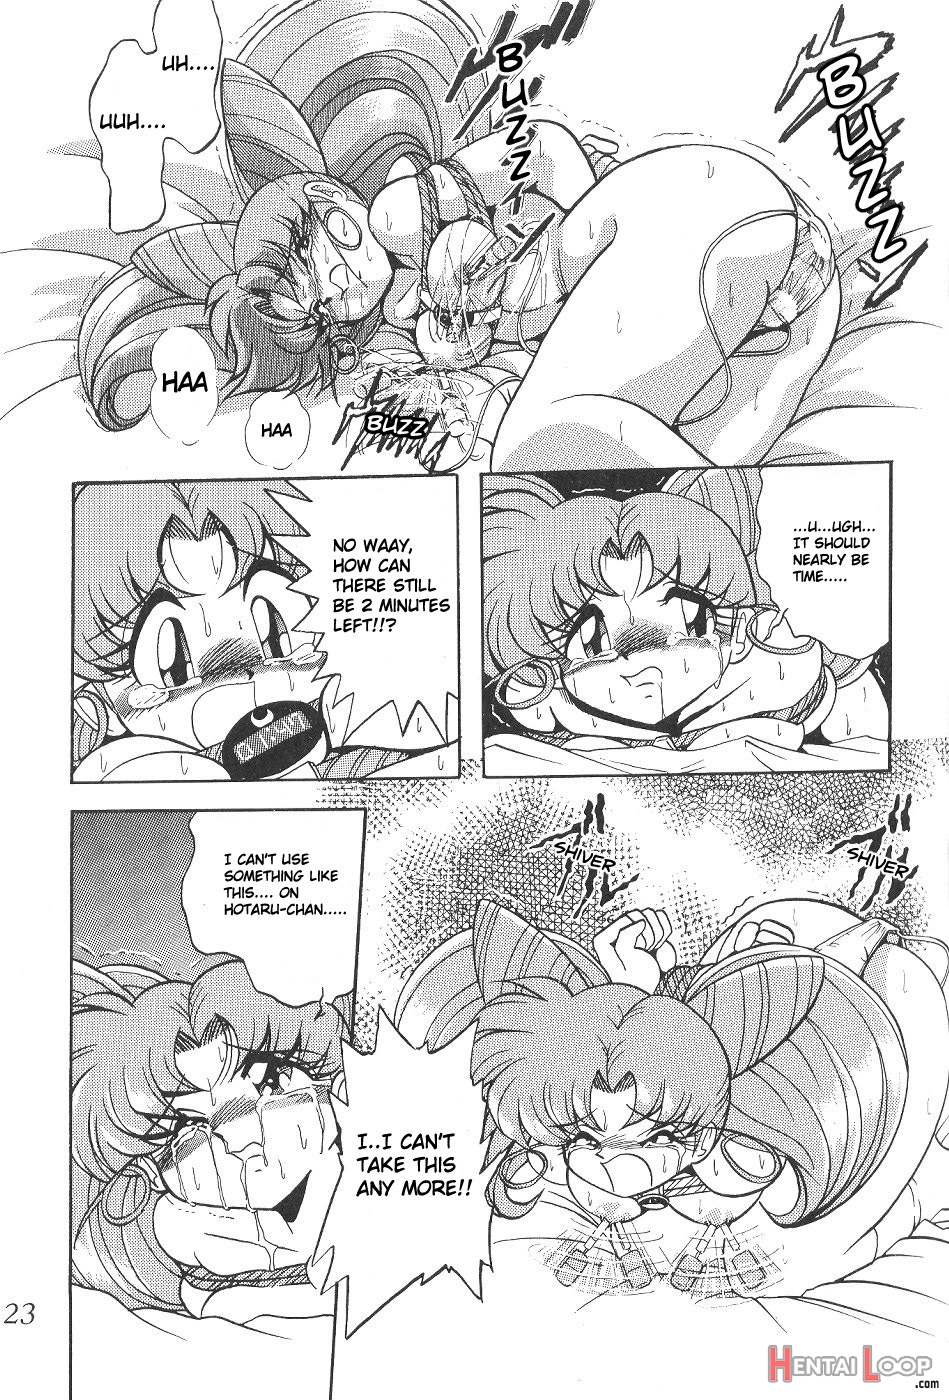 Silent Saturn 4 page 23